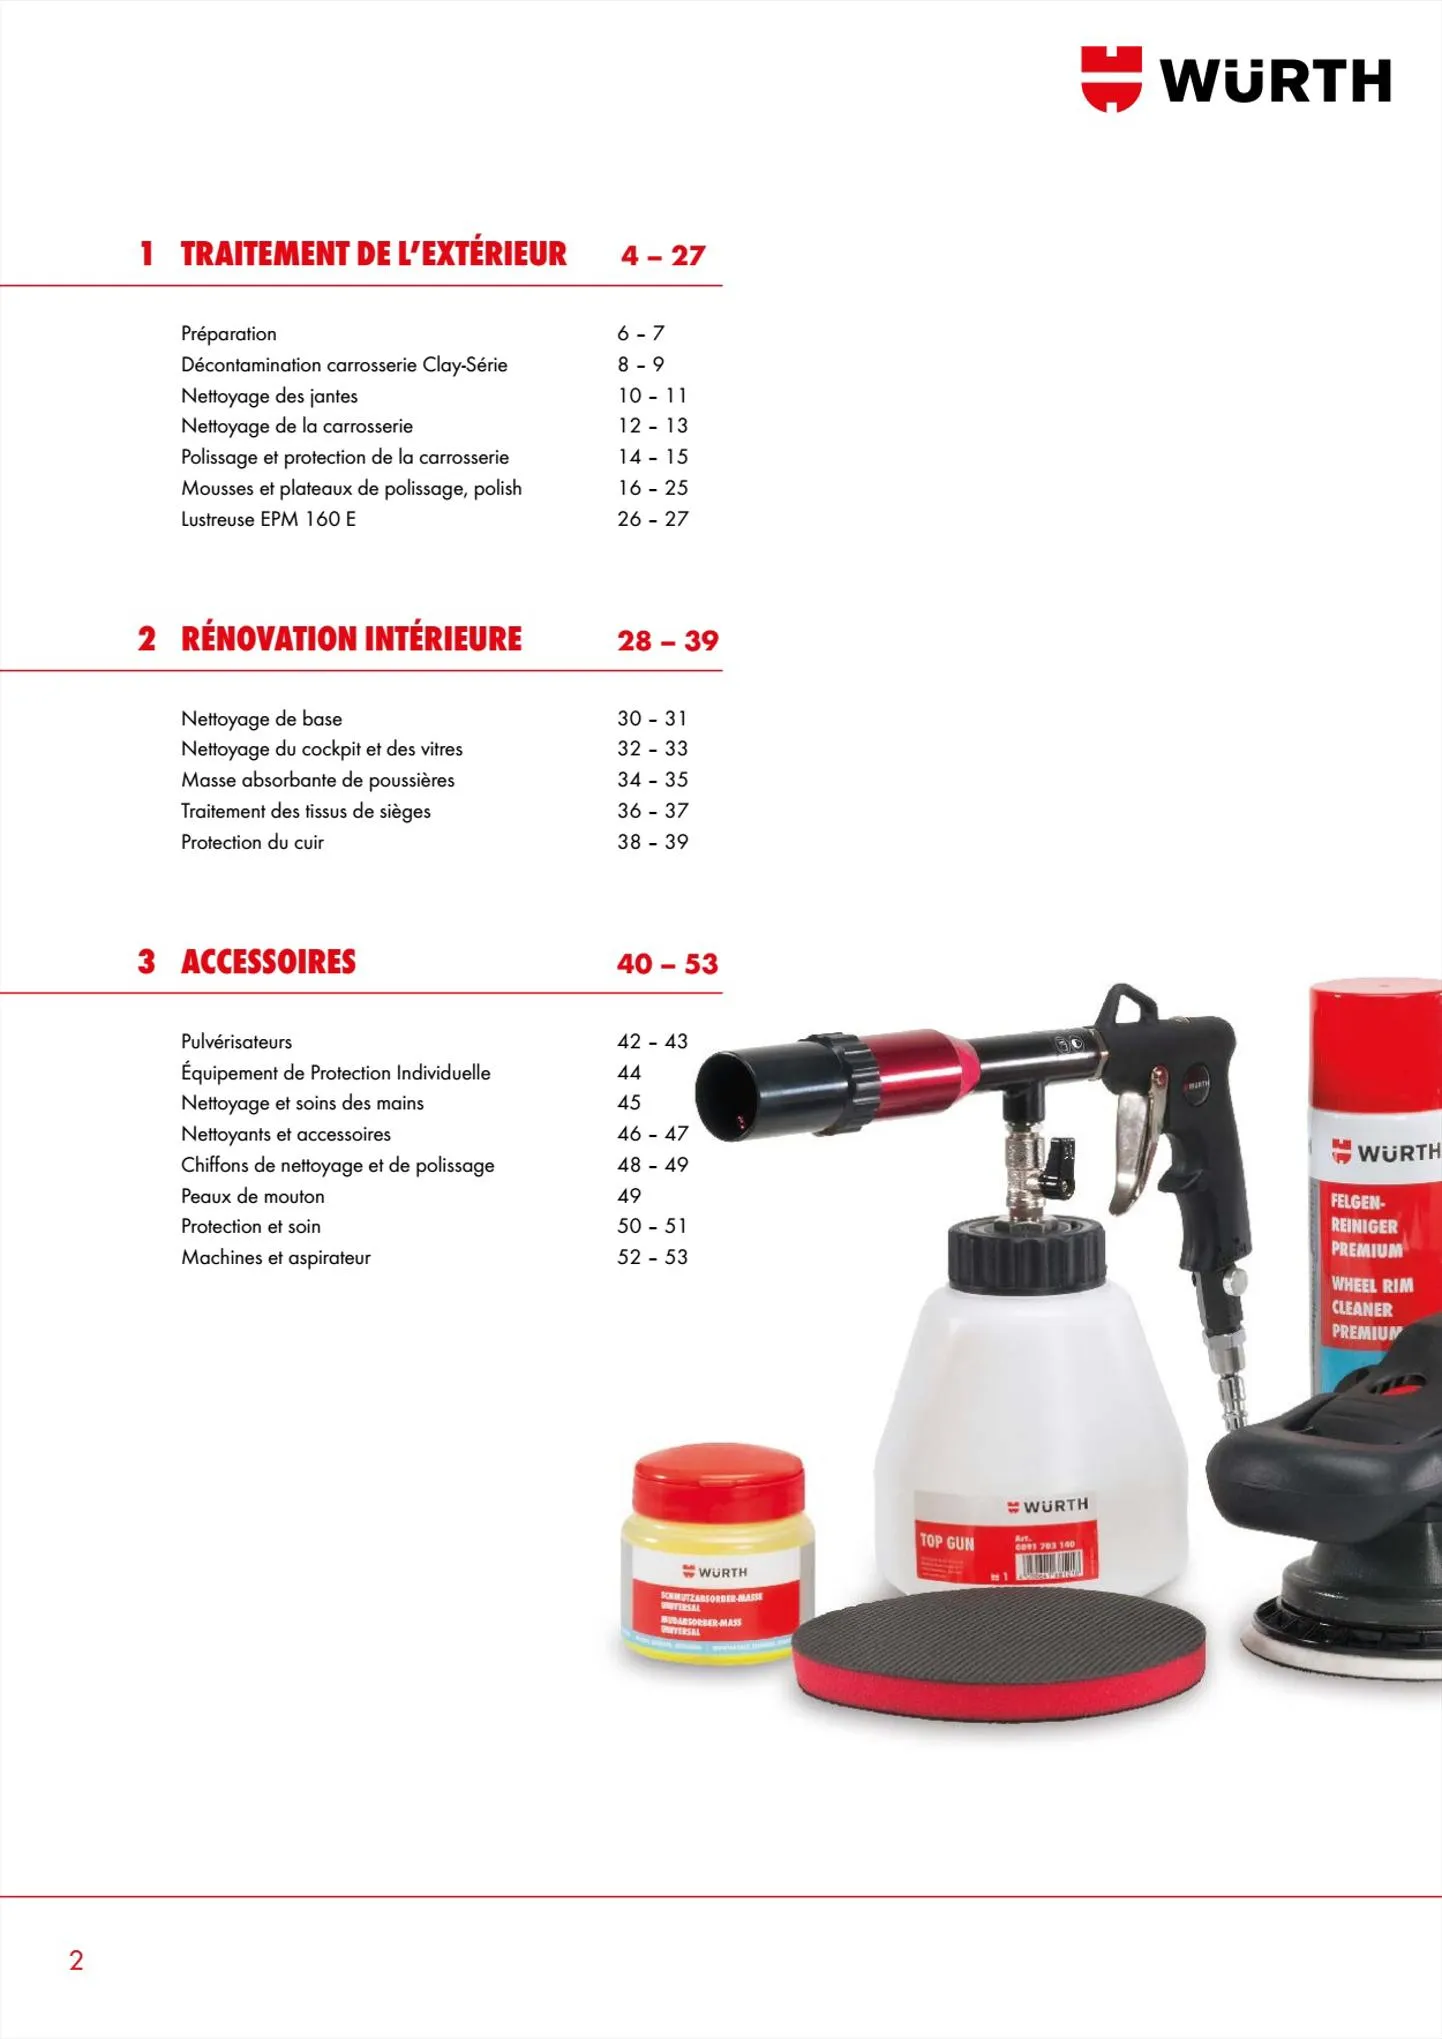 Catalogue Würth Catalogueperfect care, page 00002